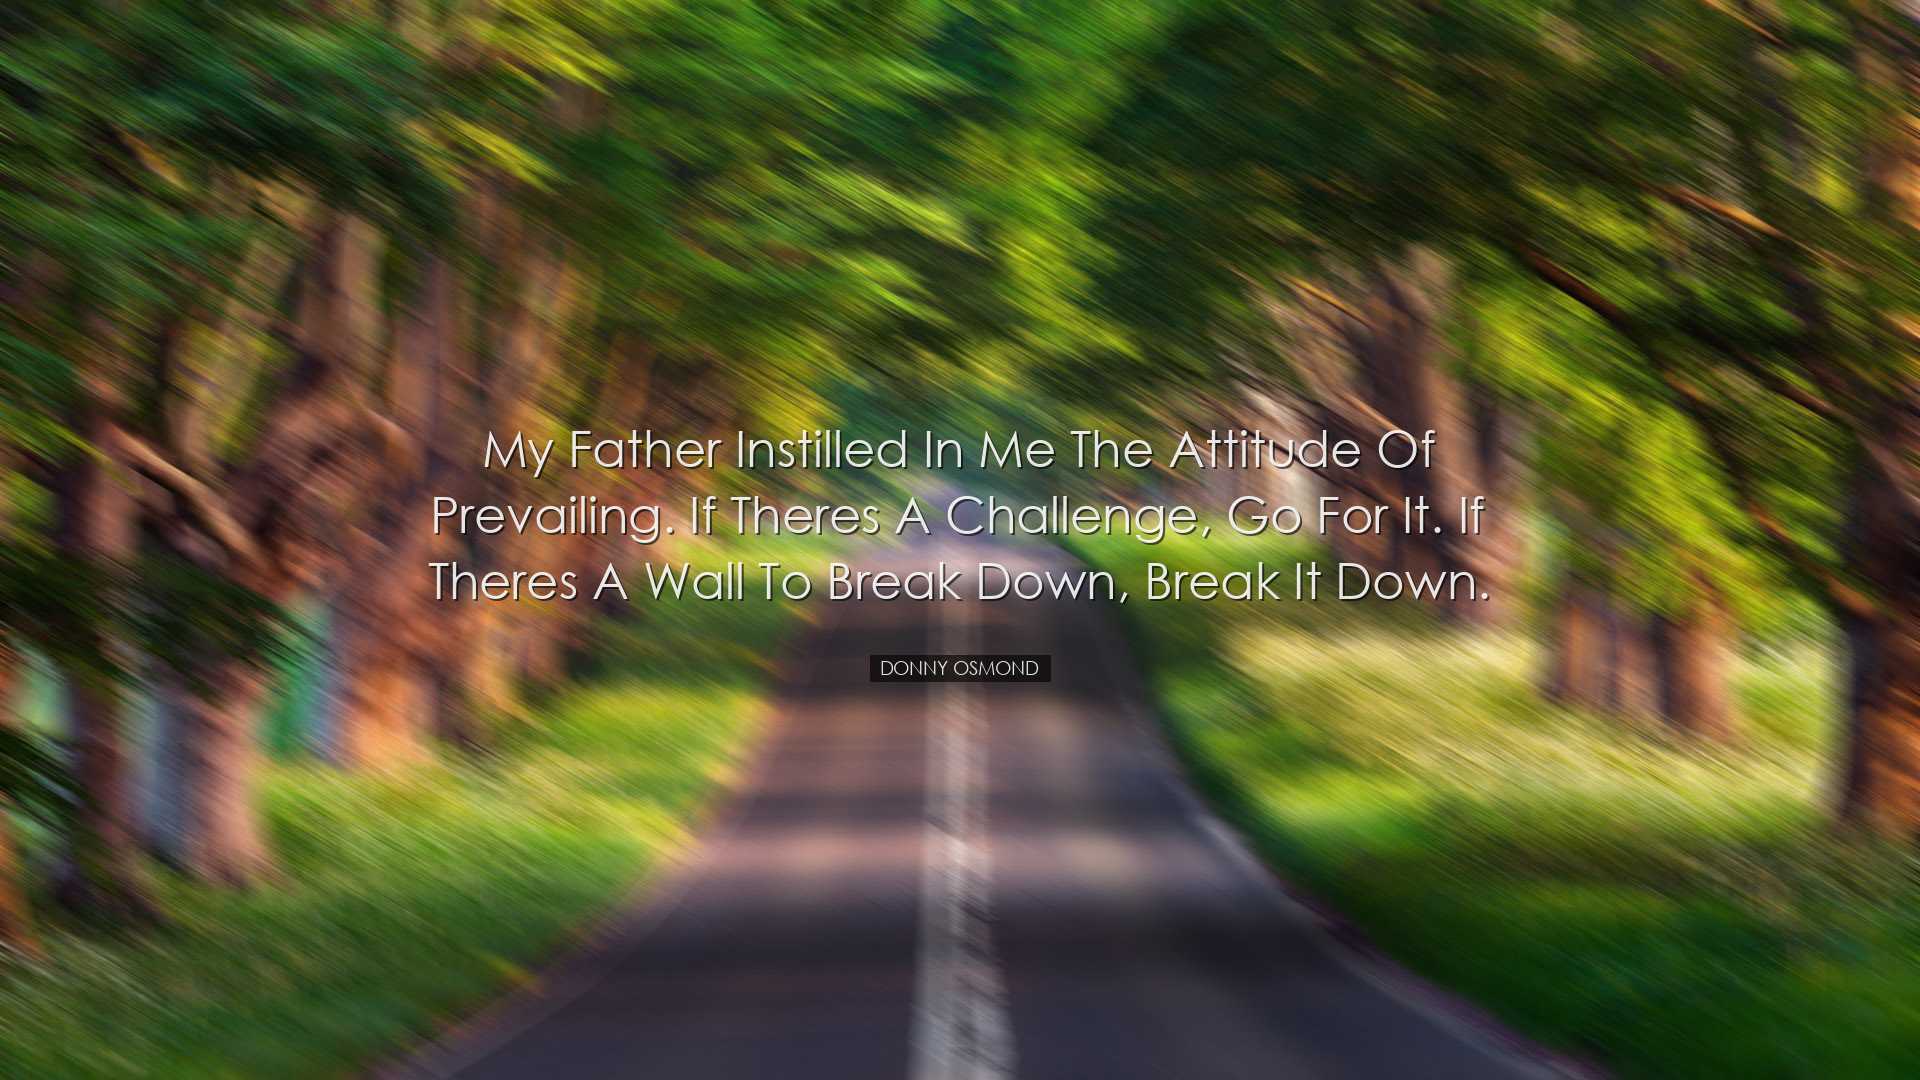 My father instilled in me the attitude of prevailing. If theres a